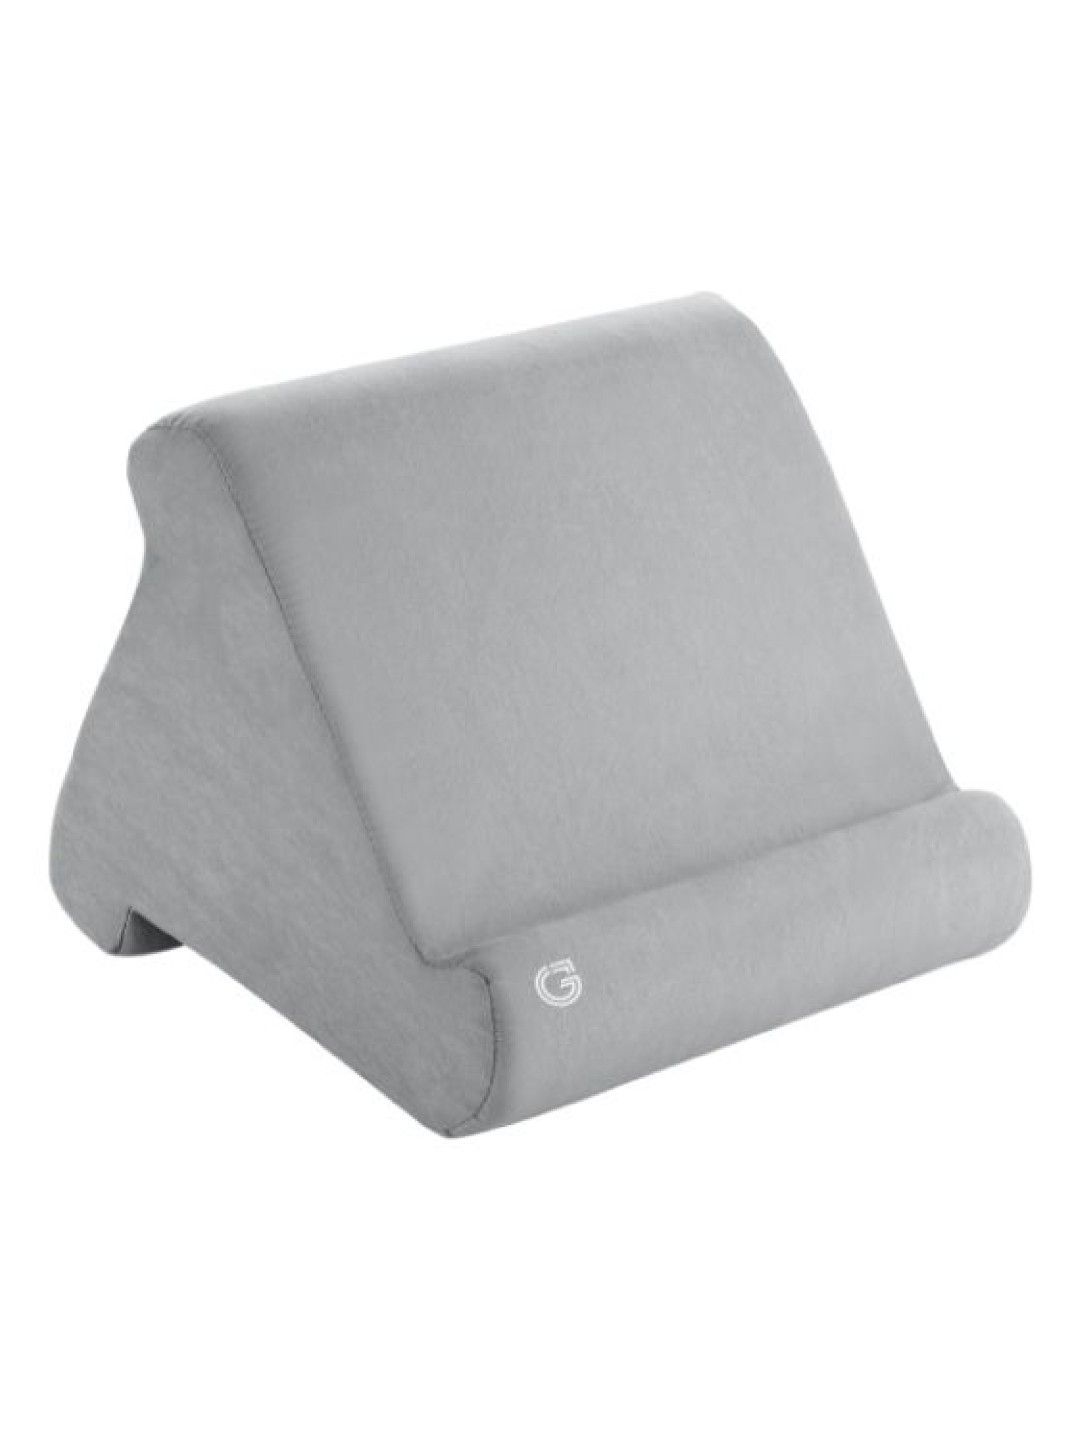 Sunbeams Lifestyle Gray Label Premium Tablet Pillow Stand